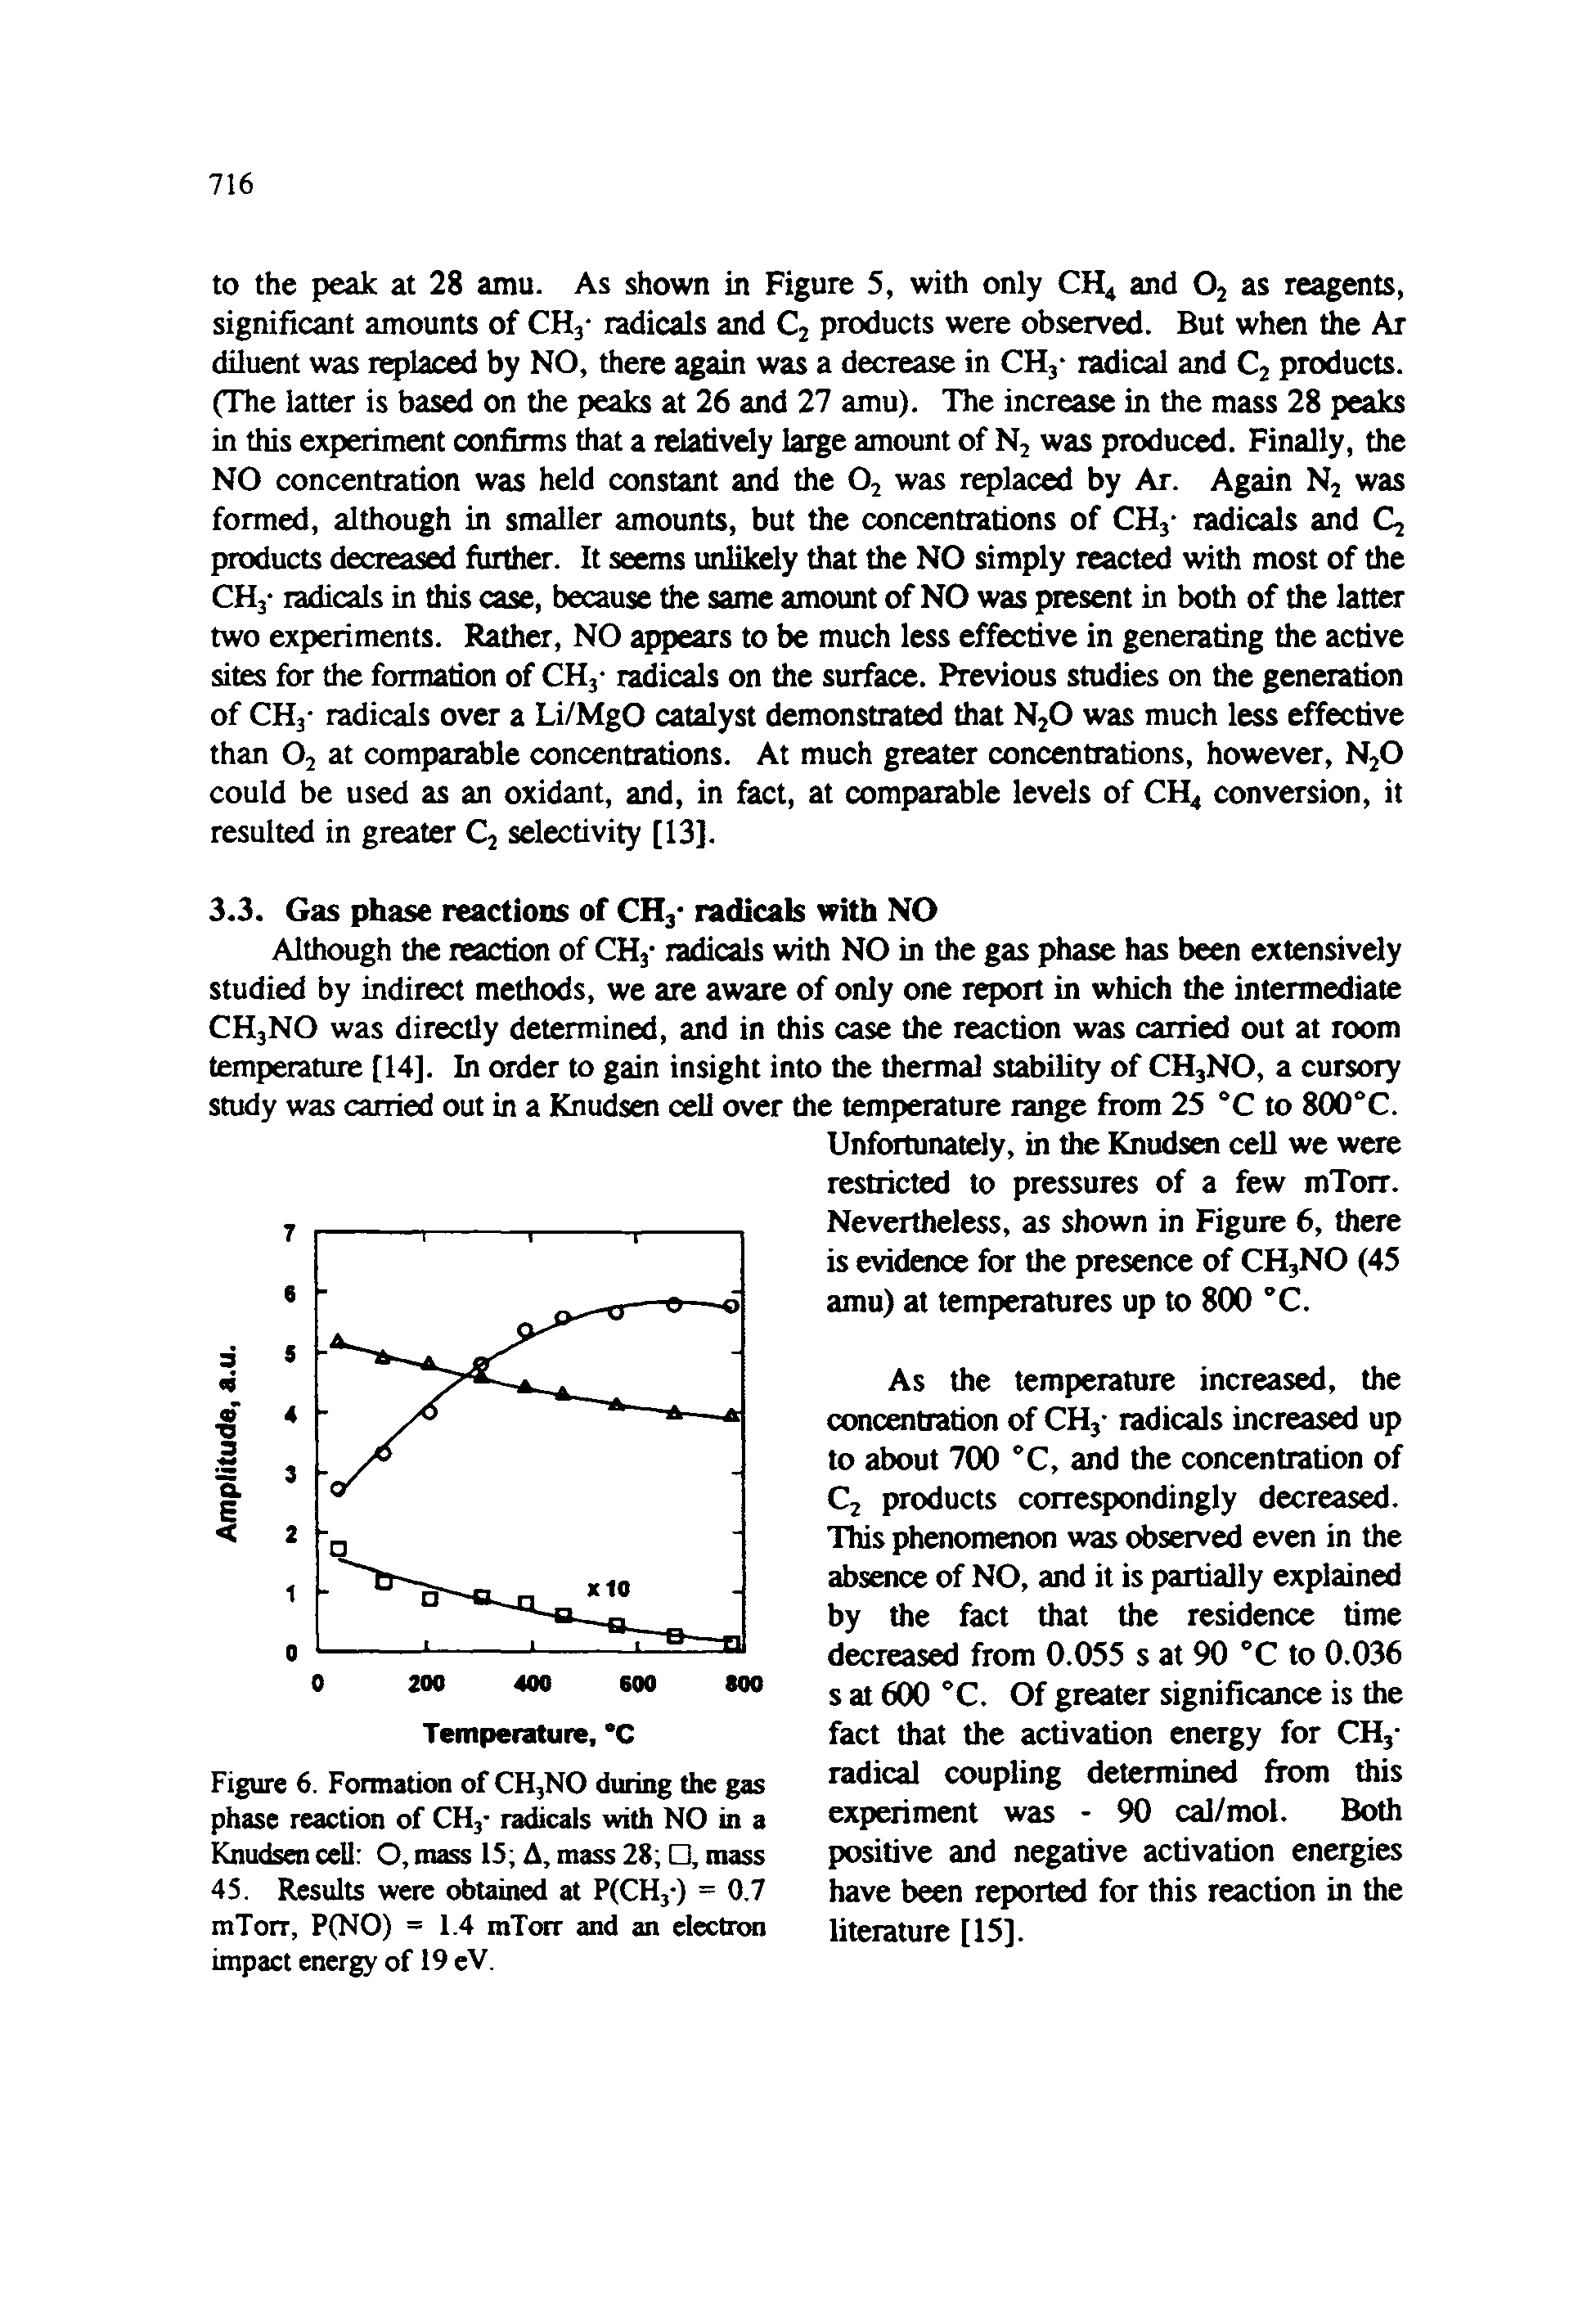 Figure 6. Formation of CH3NO during the gas phase reaction of CH3- radicals with NO in a Knudsen cell O, mass 15 A, mass 28 , mass 45. Results were obtained at P(CHj-) = 0.7 mTorr, P(NO) = 1.4 mTorr and an electron impact energy of 19 eV.